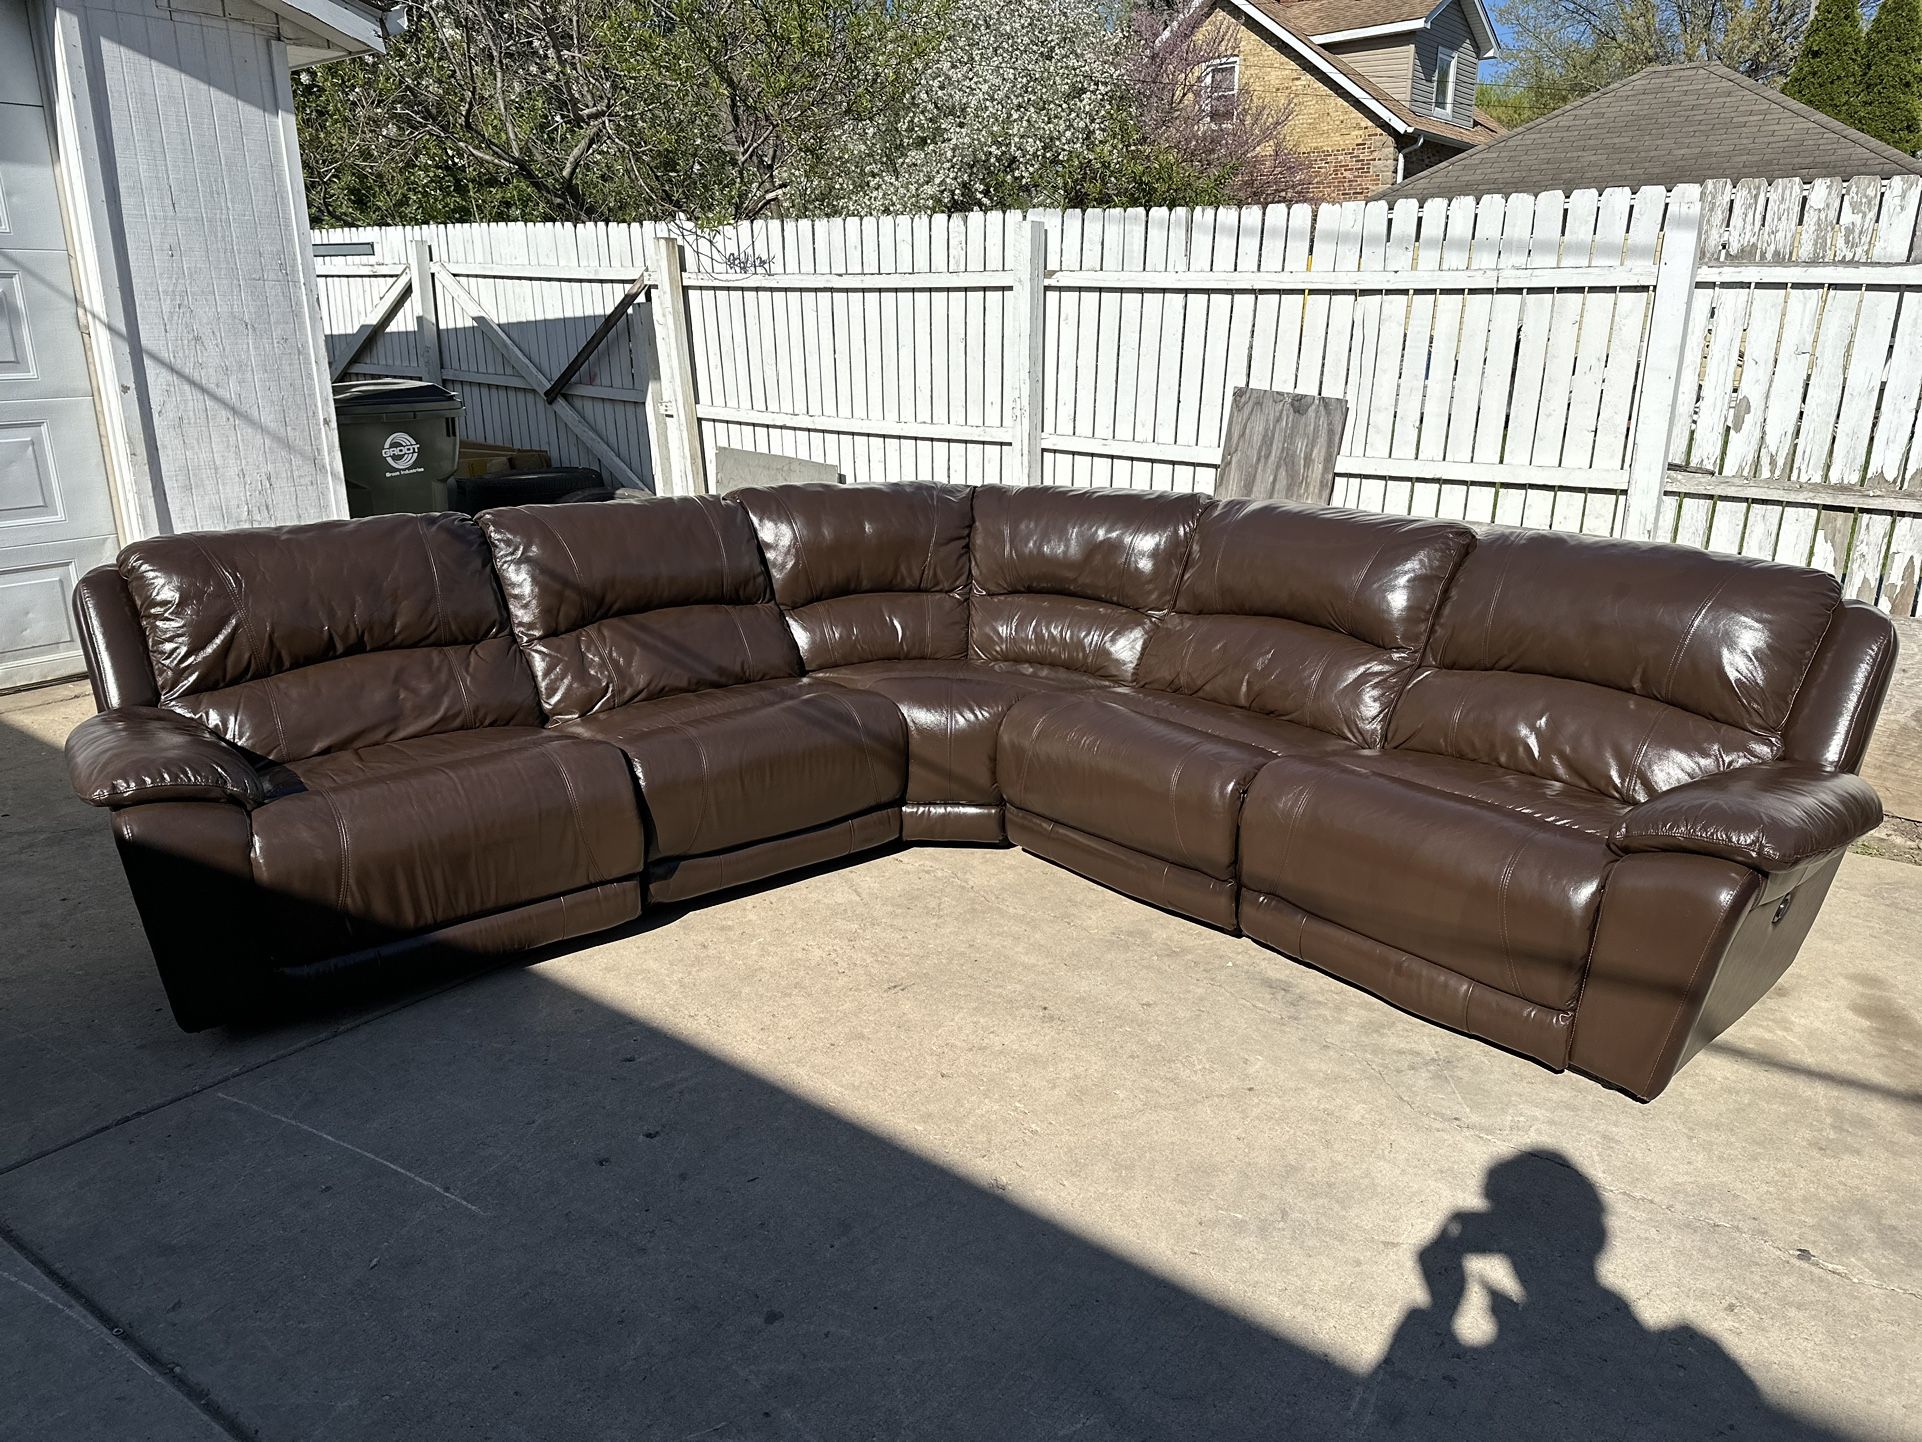 FREE DELIVERY 🚚  Ashley furniture Real Leather brown  Couch, sofa, Sectional recliner, electric  